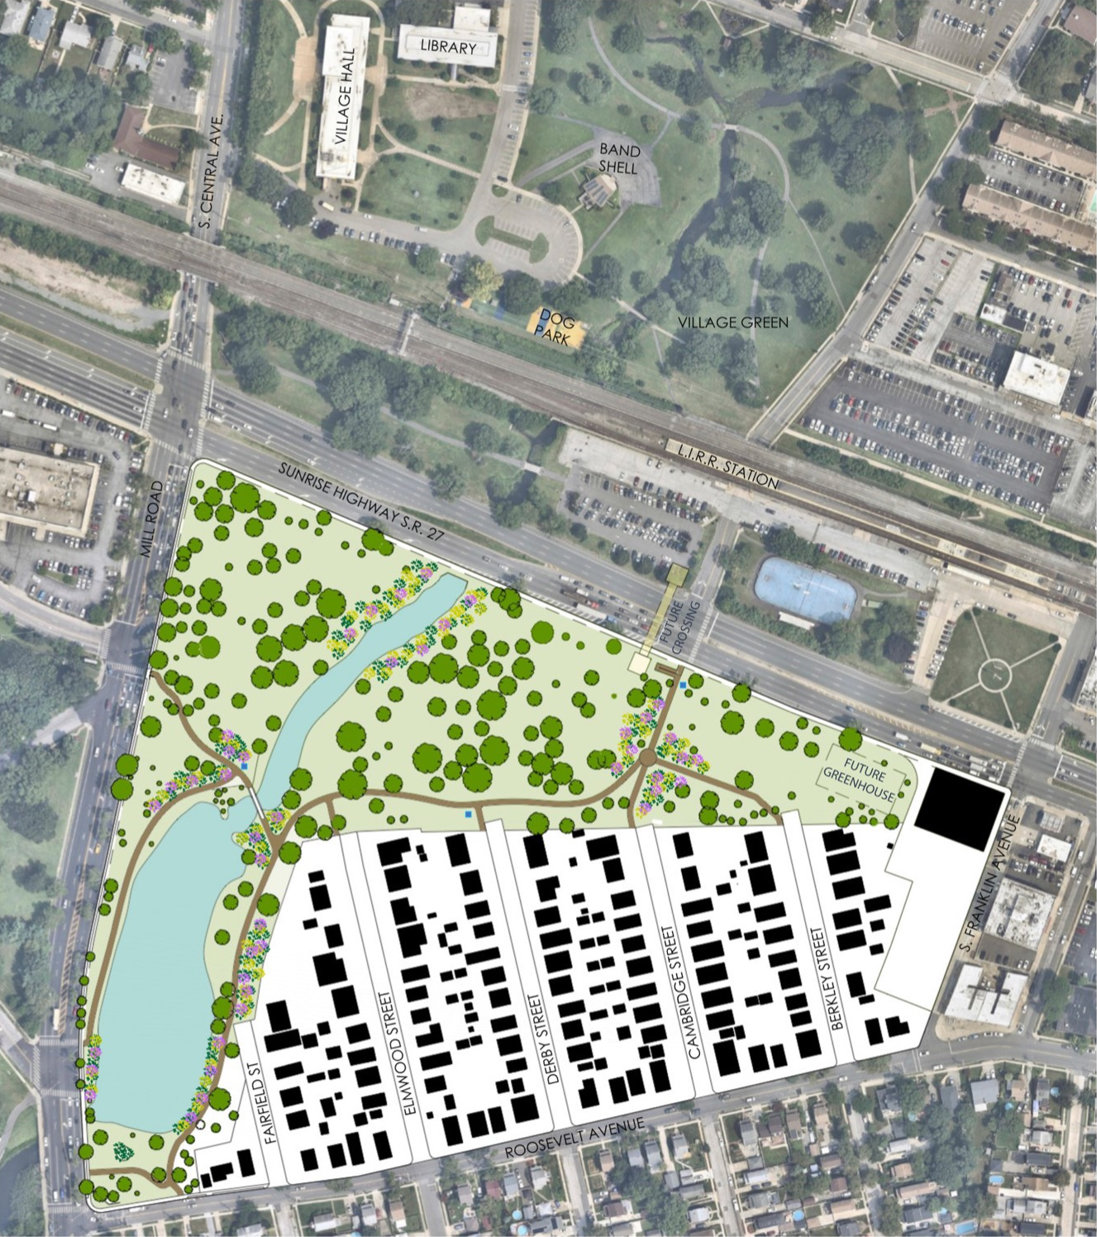 An initial site plan for the pedestrian and cyclist pathway network through Edward W. Cahill Memorial Park shows connections to various dead-end residential streets and major thoroughfares.